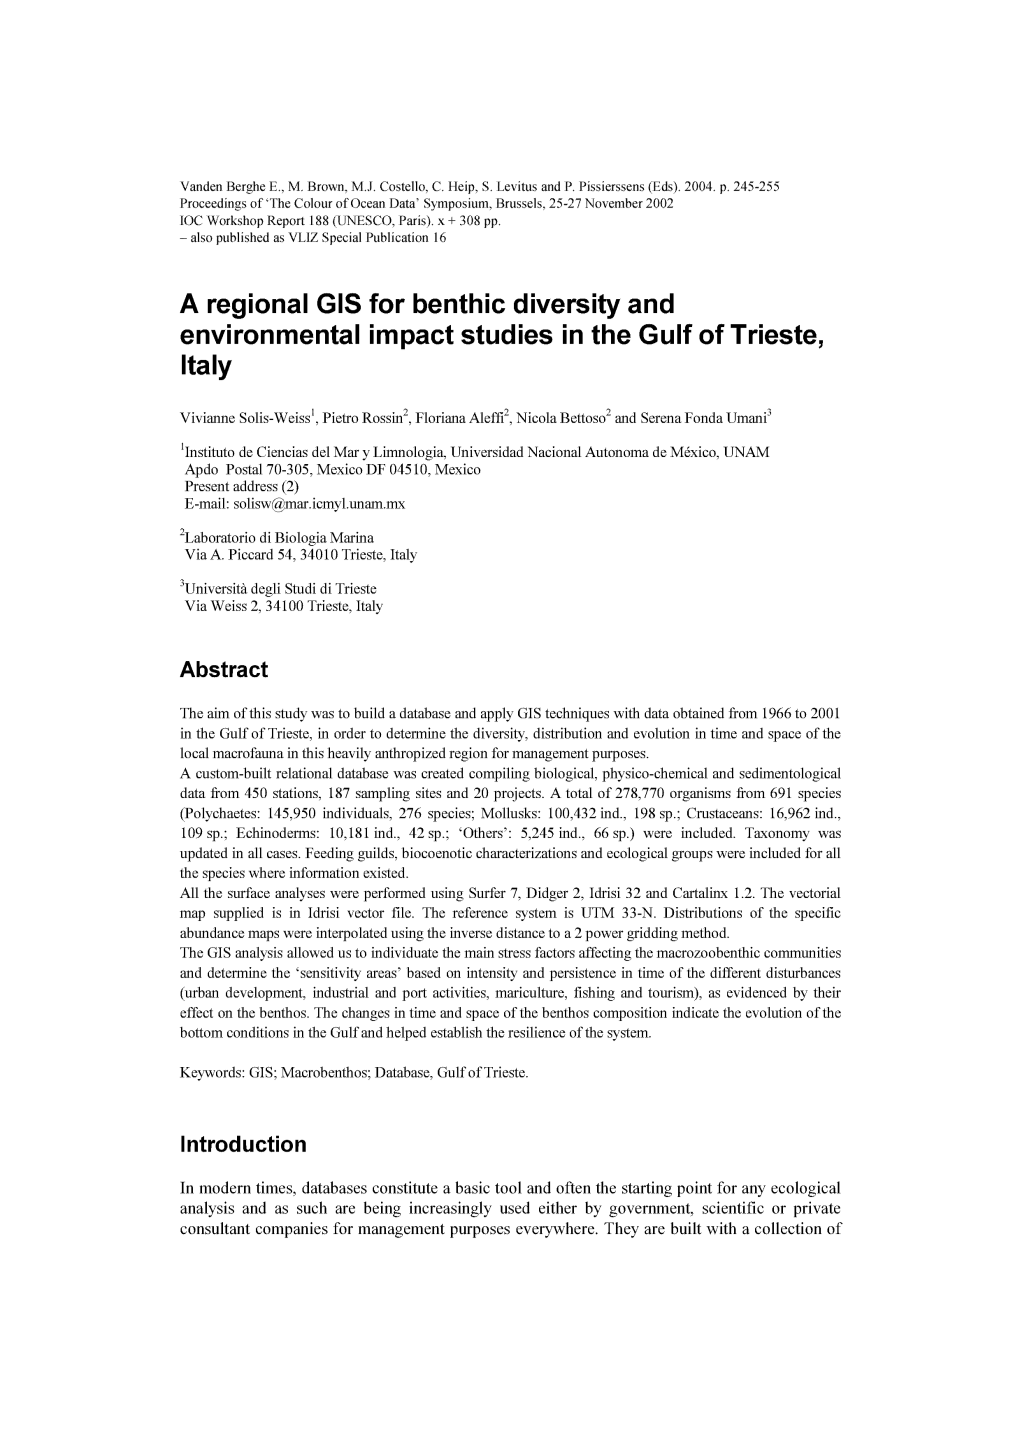 A Regional GIS for Benthic Diversity and Environmental Impact Studies in the Gulf of Trieste, Italy